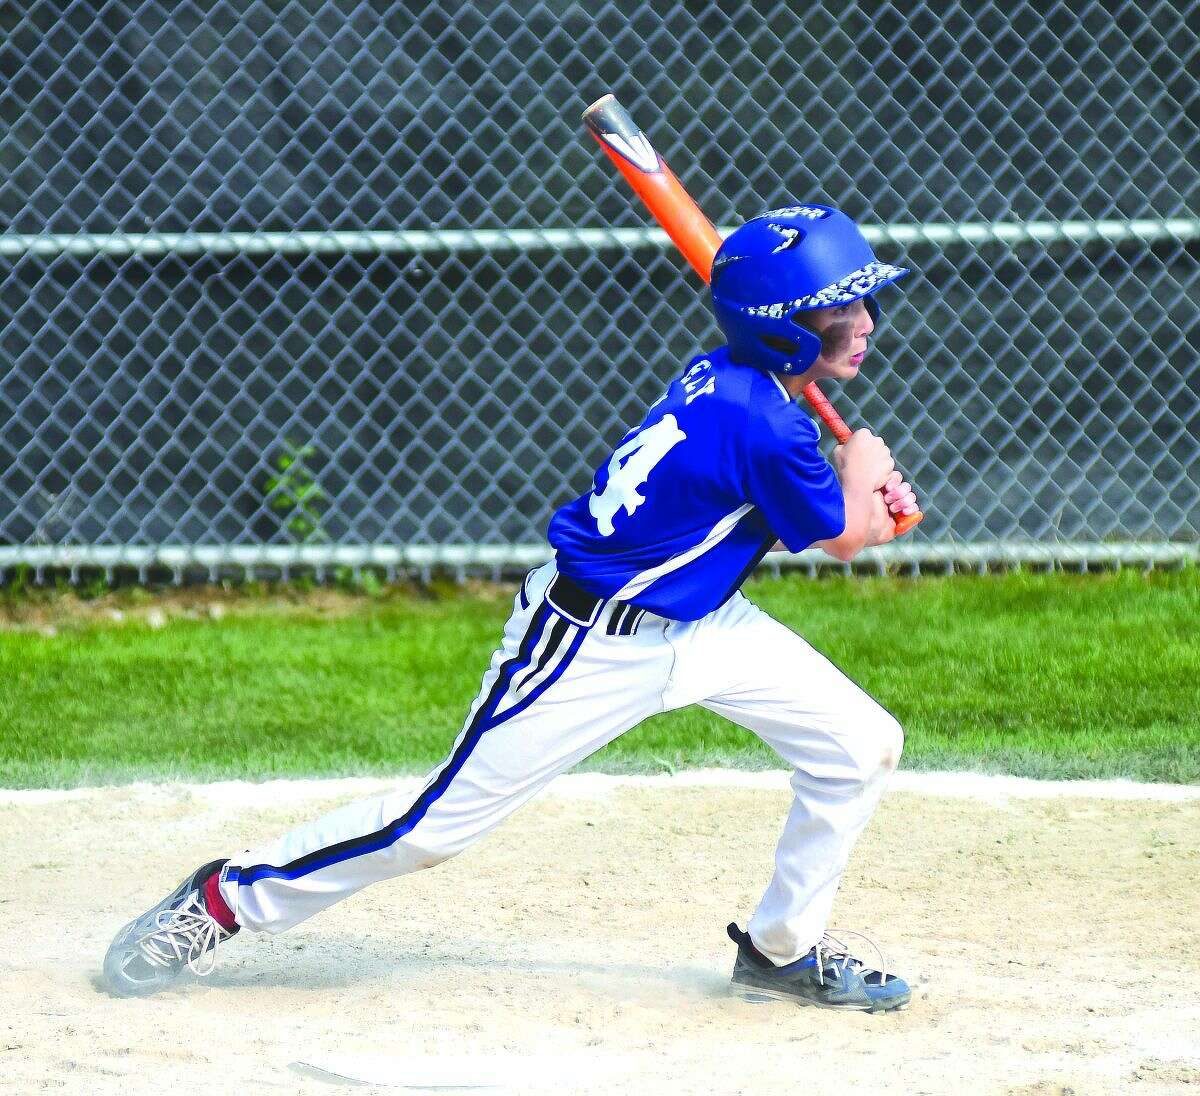 Norwalk's Chris Ely laces a two-run double with the bases loaded during Sunday's Norwalk 11-year-old Cal Ripken New England regional game vs. Swanzey, N.H.., at Keyes Field in Dover, N.H. Norwalk won 5-2 and Ely is 4-for-4 with seven RBIs with the bases loaded through two games.